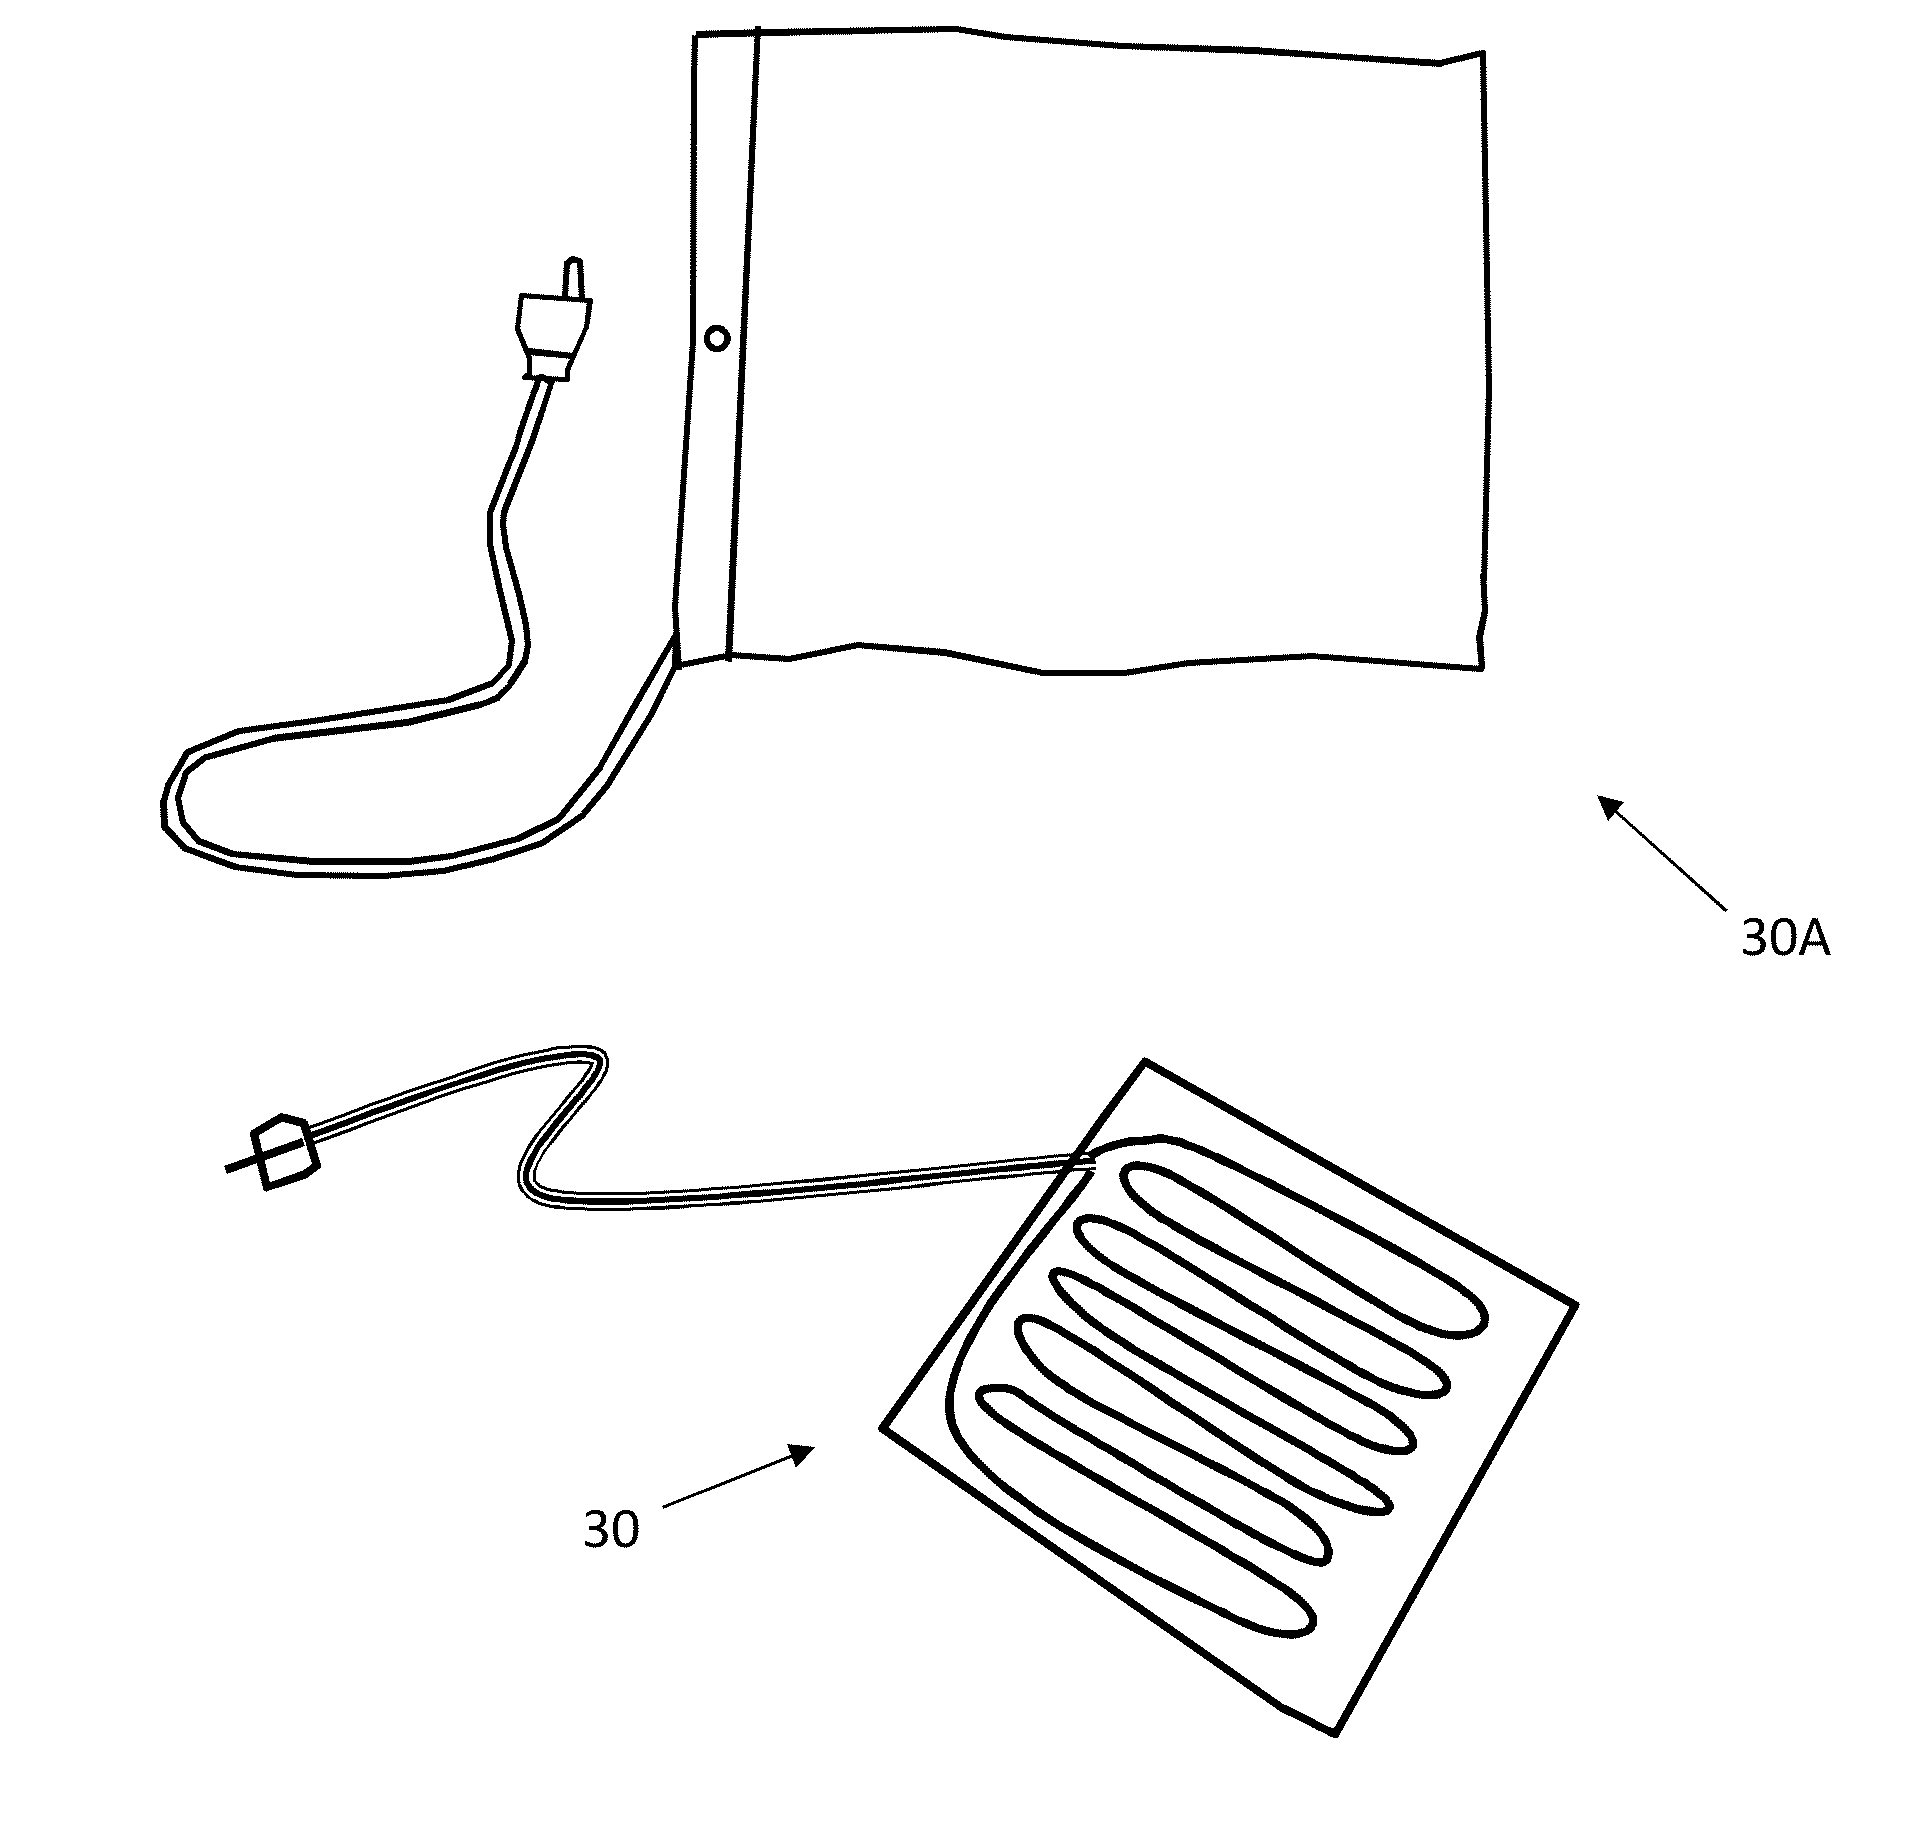 Personal grounding device or method to ground for a human being